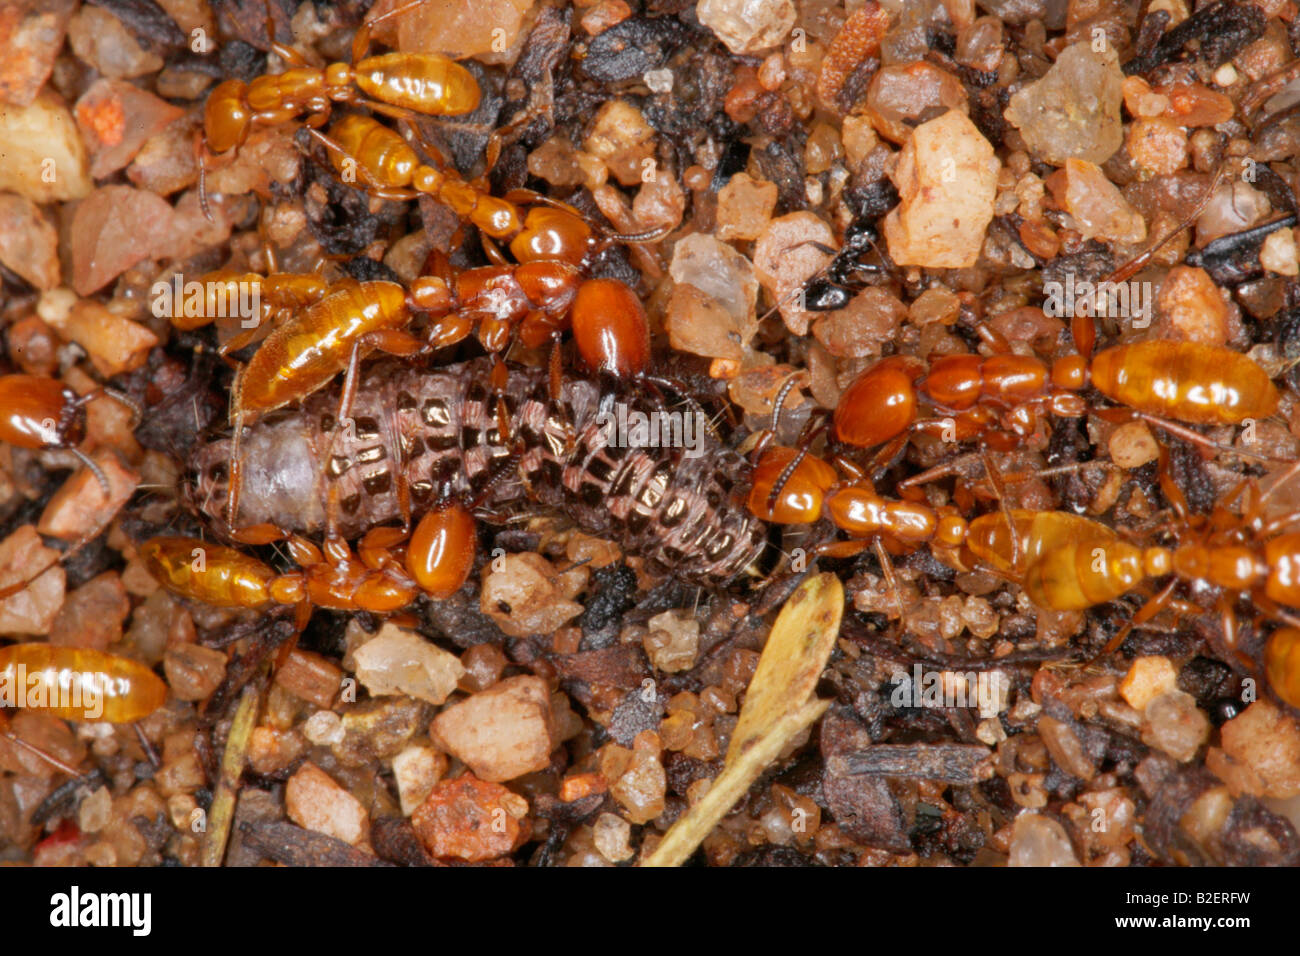 Termites foraging on a worm Stock Photo